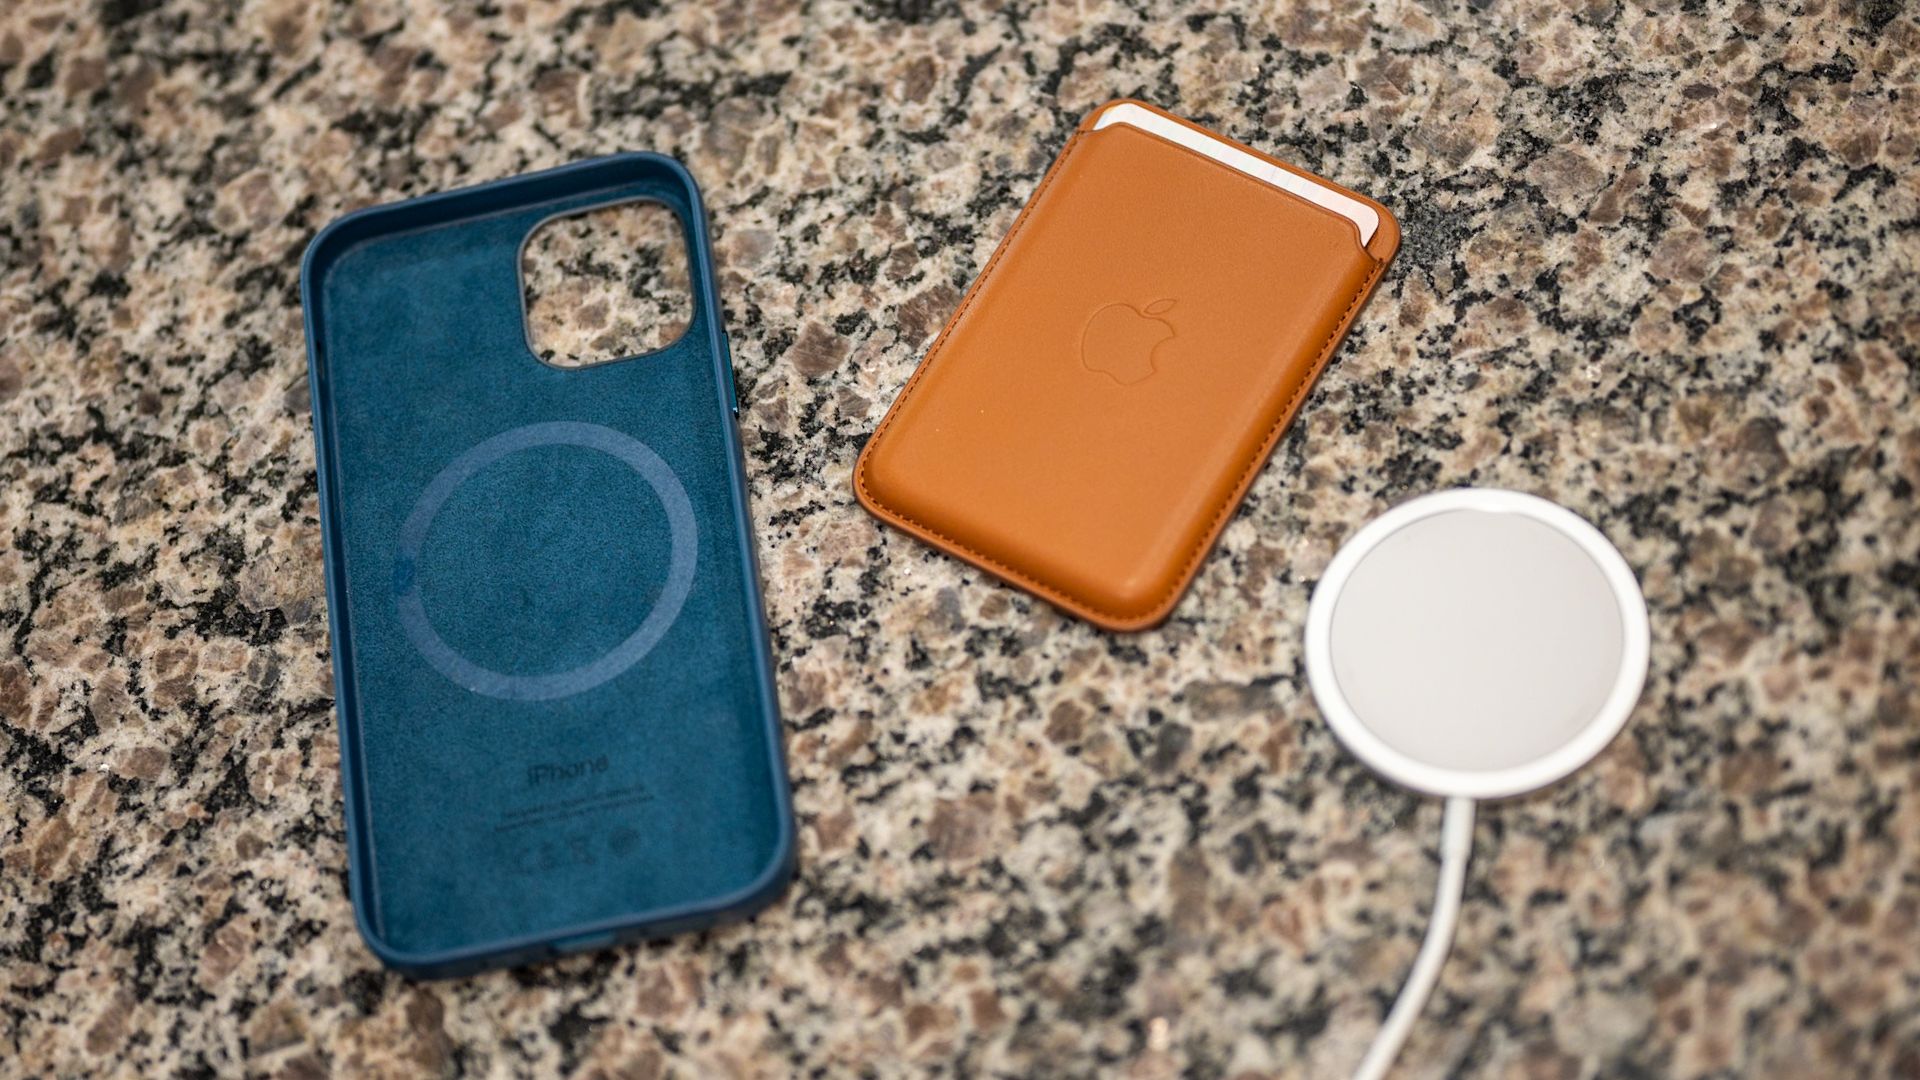 Apple's MagSafe charger, leather wallet, and case for the iPhone 12 Pro